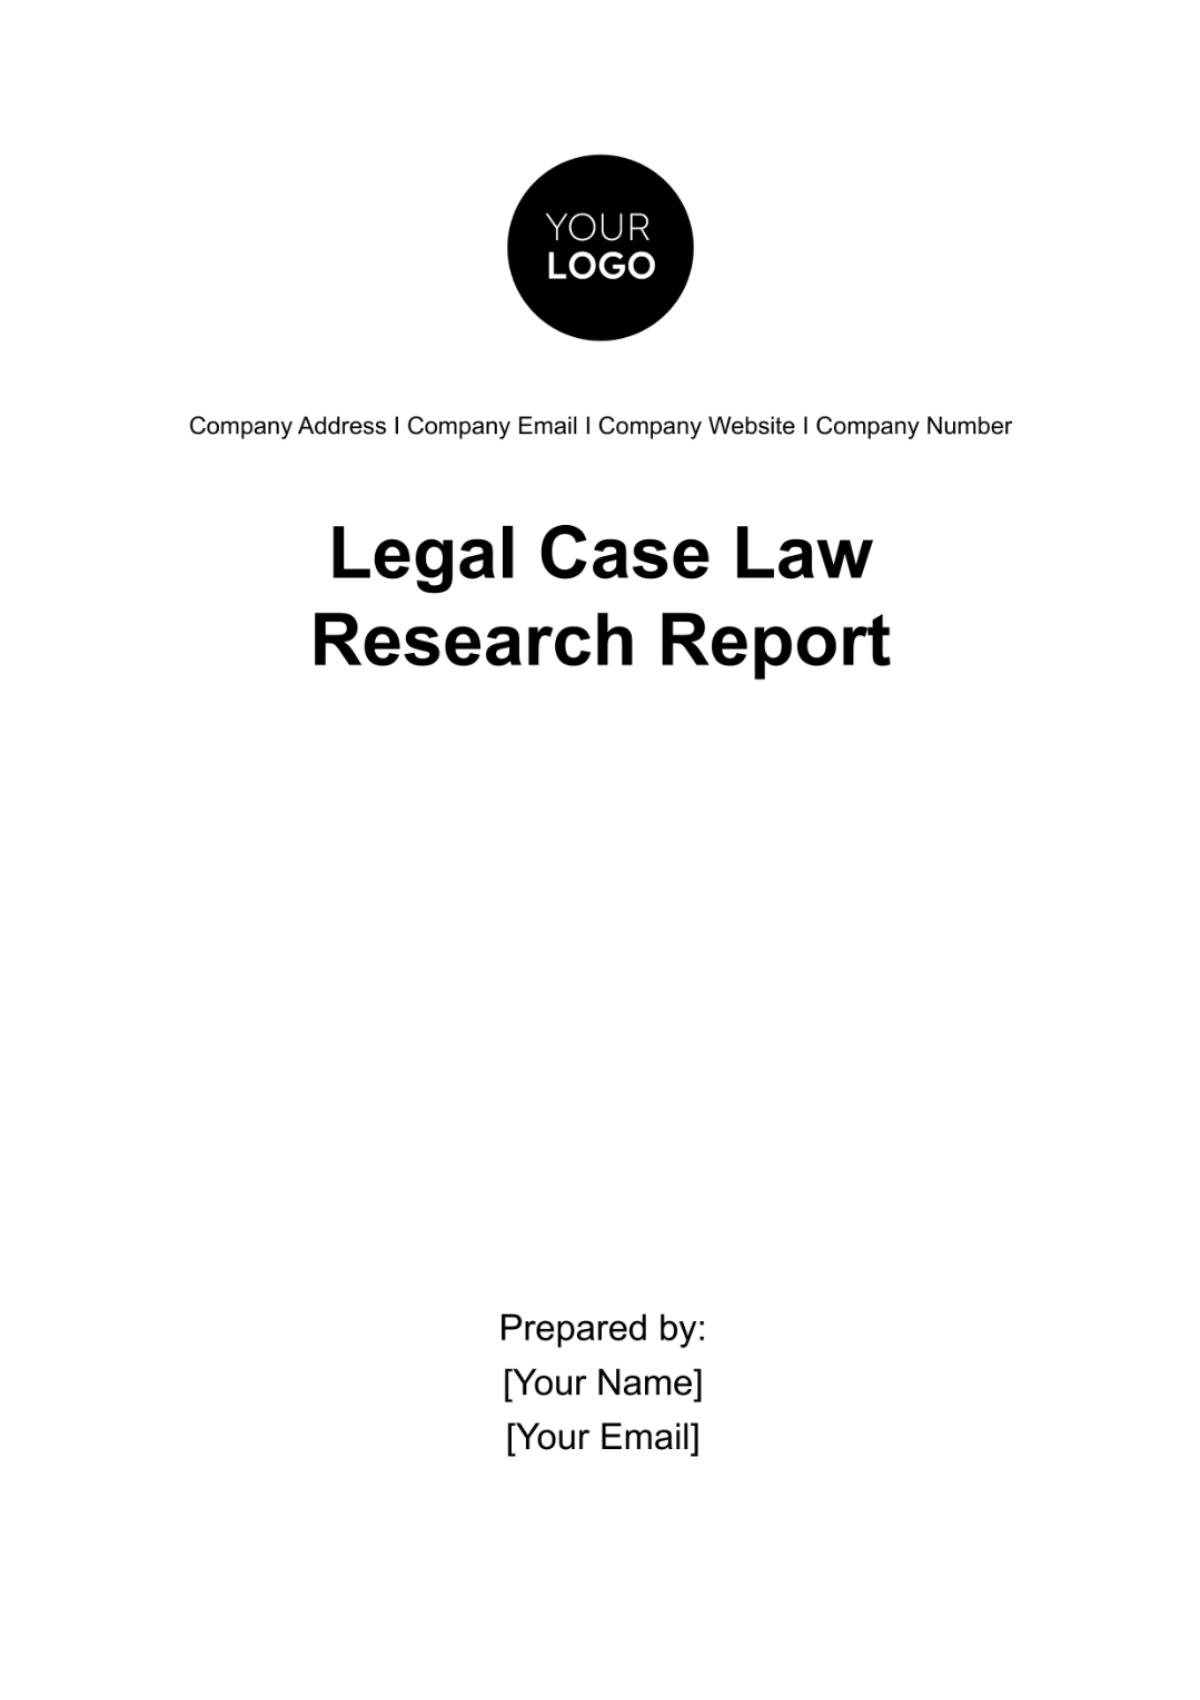 Legal Case Law Research Report Template